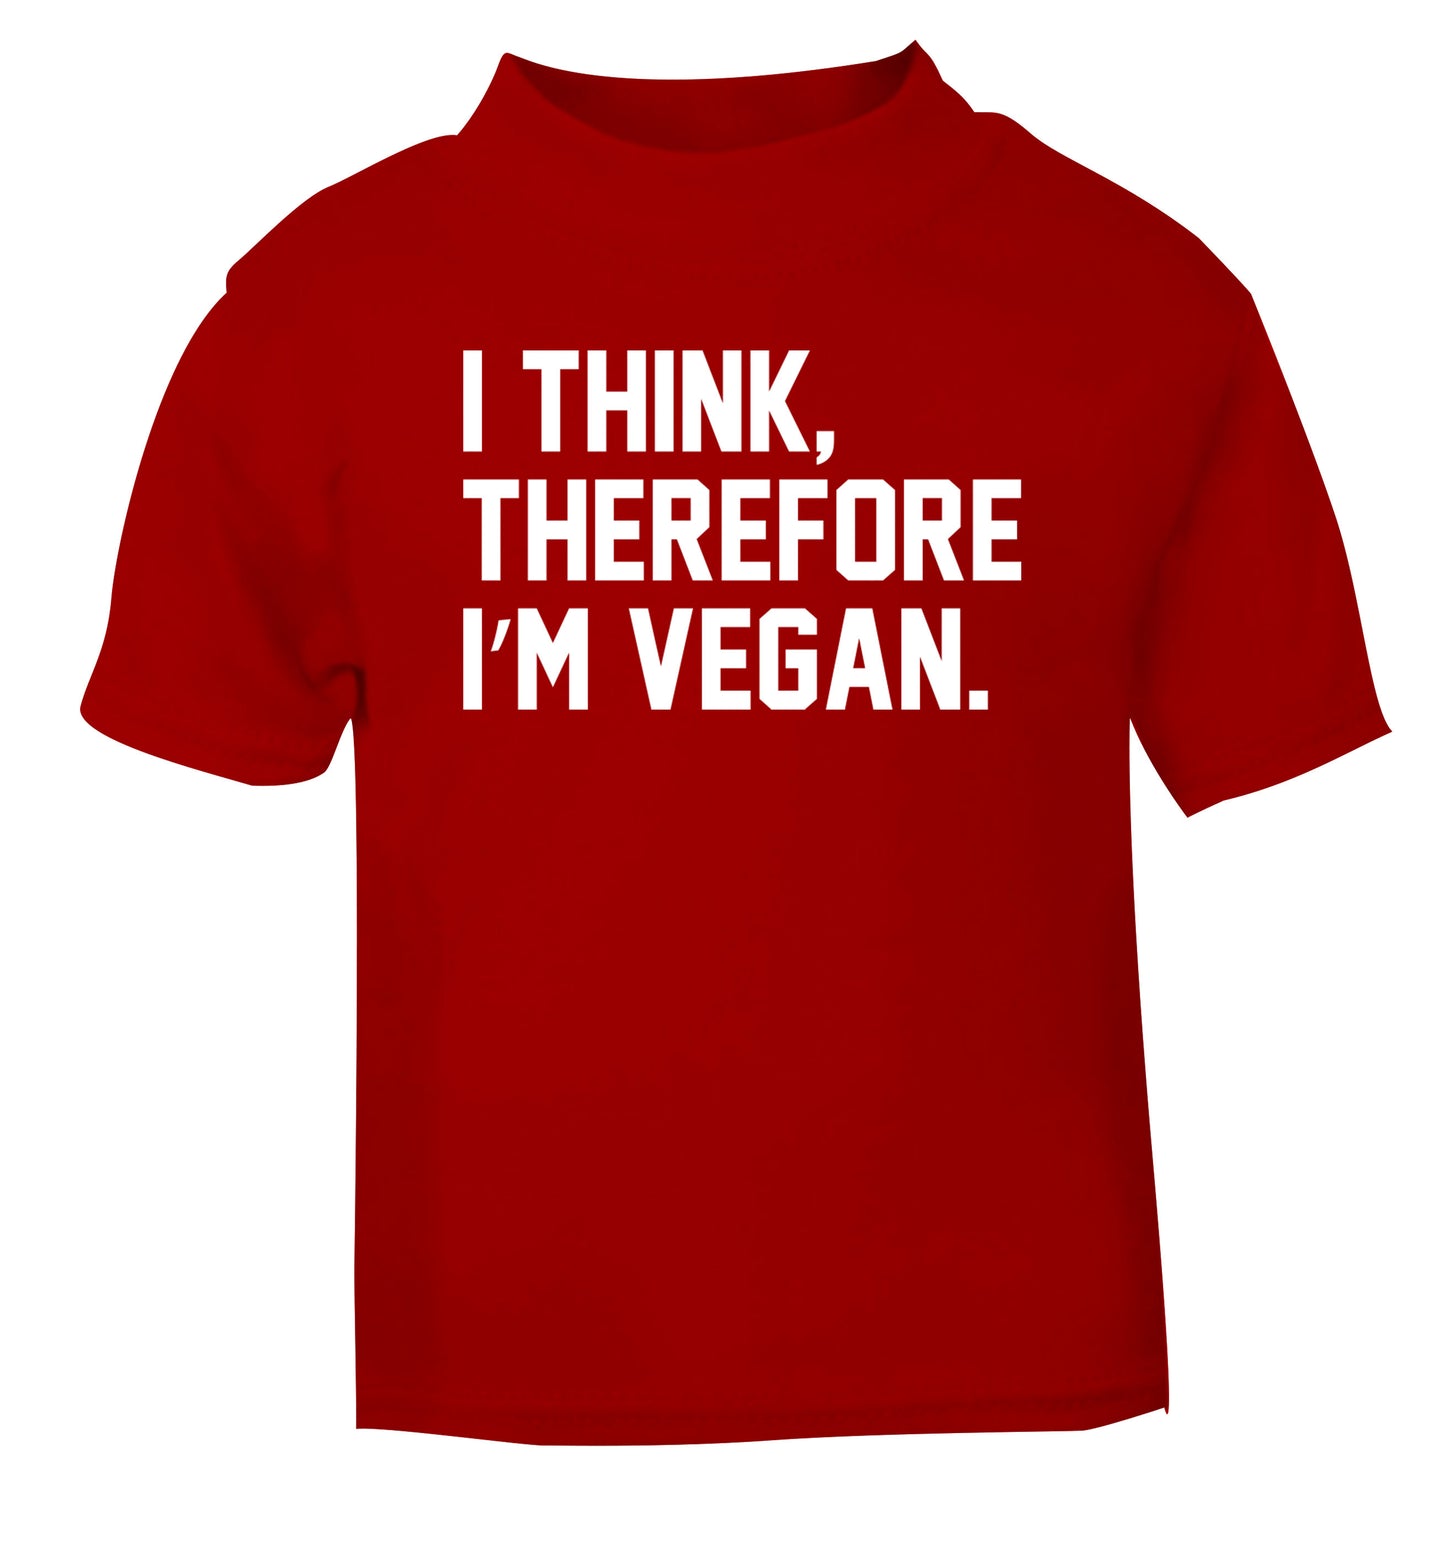 I think therefore I'm vegan red Baby Toddler Tshirt 2 Years